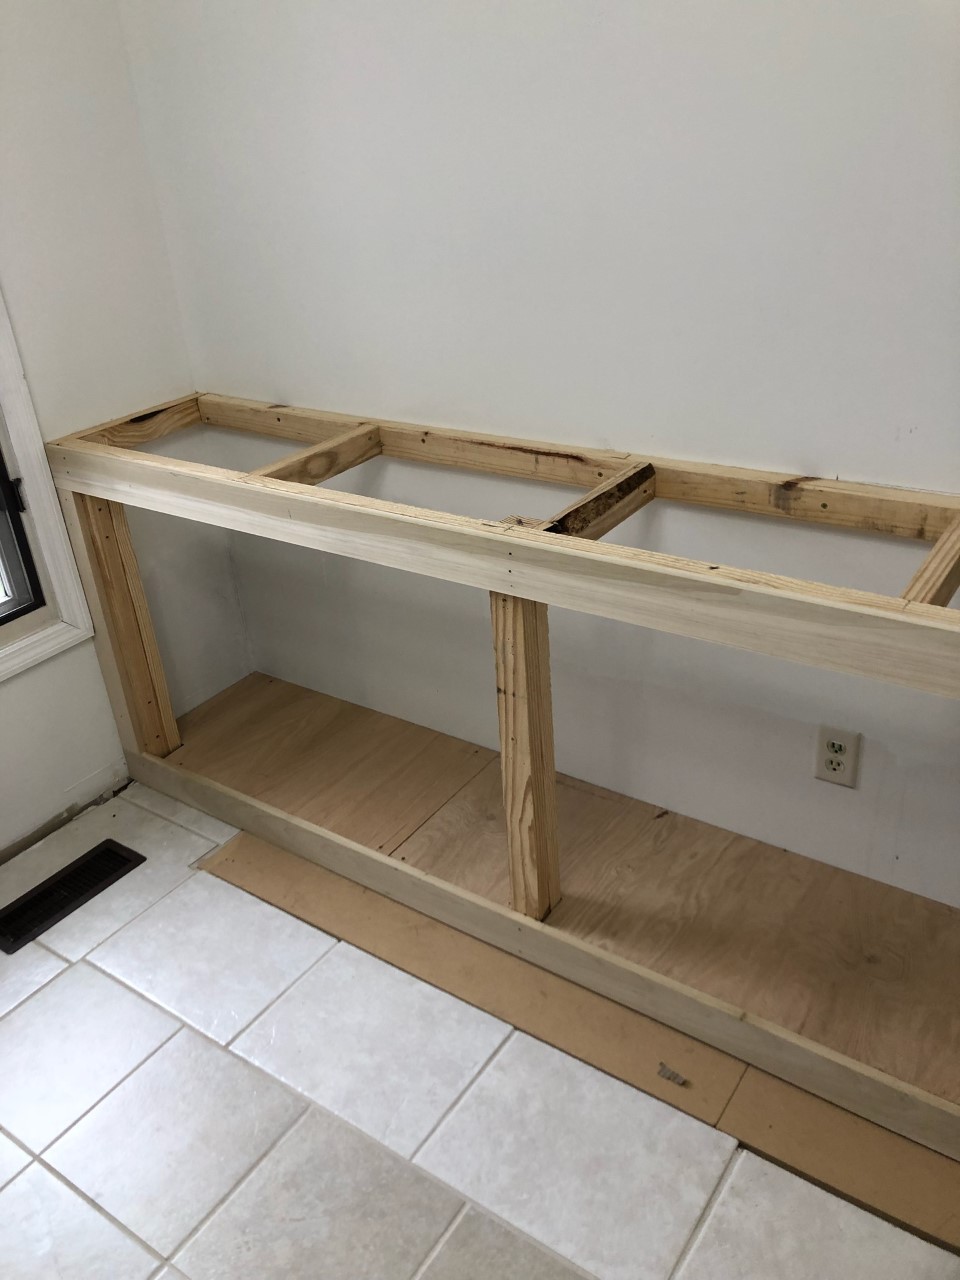 Diy Kitchen Cabinets For Under 200 A, How To Build A Kitchen Cupboard From Scratch